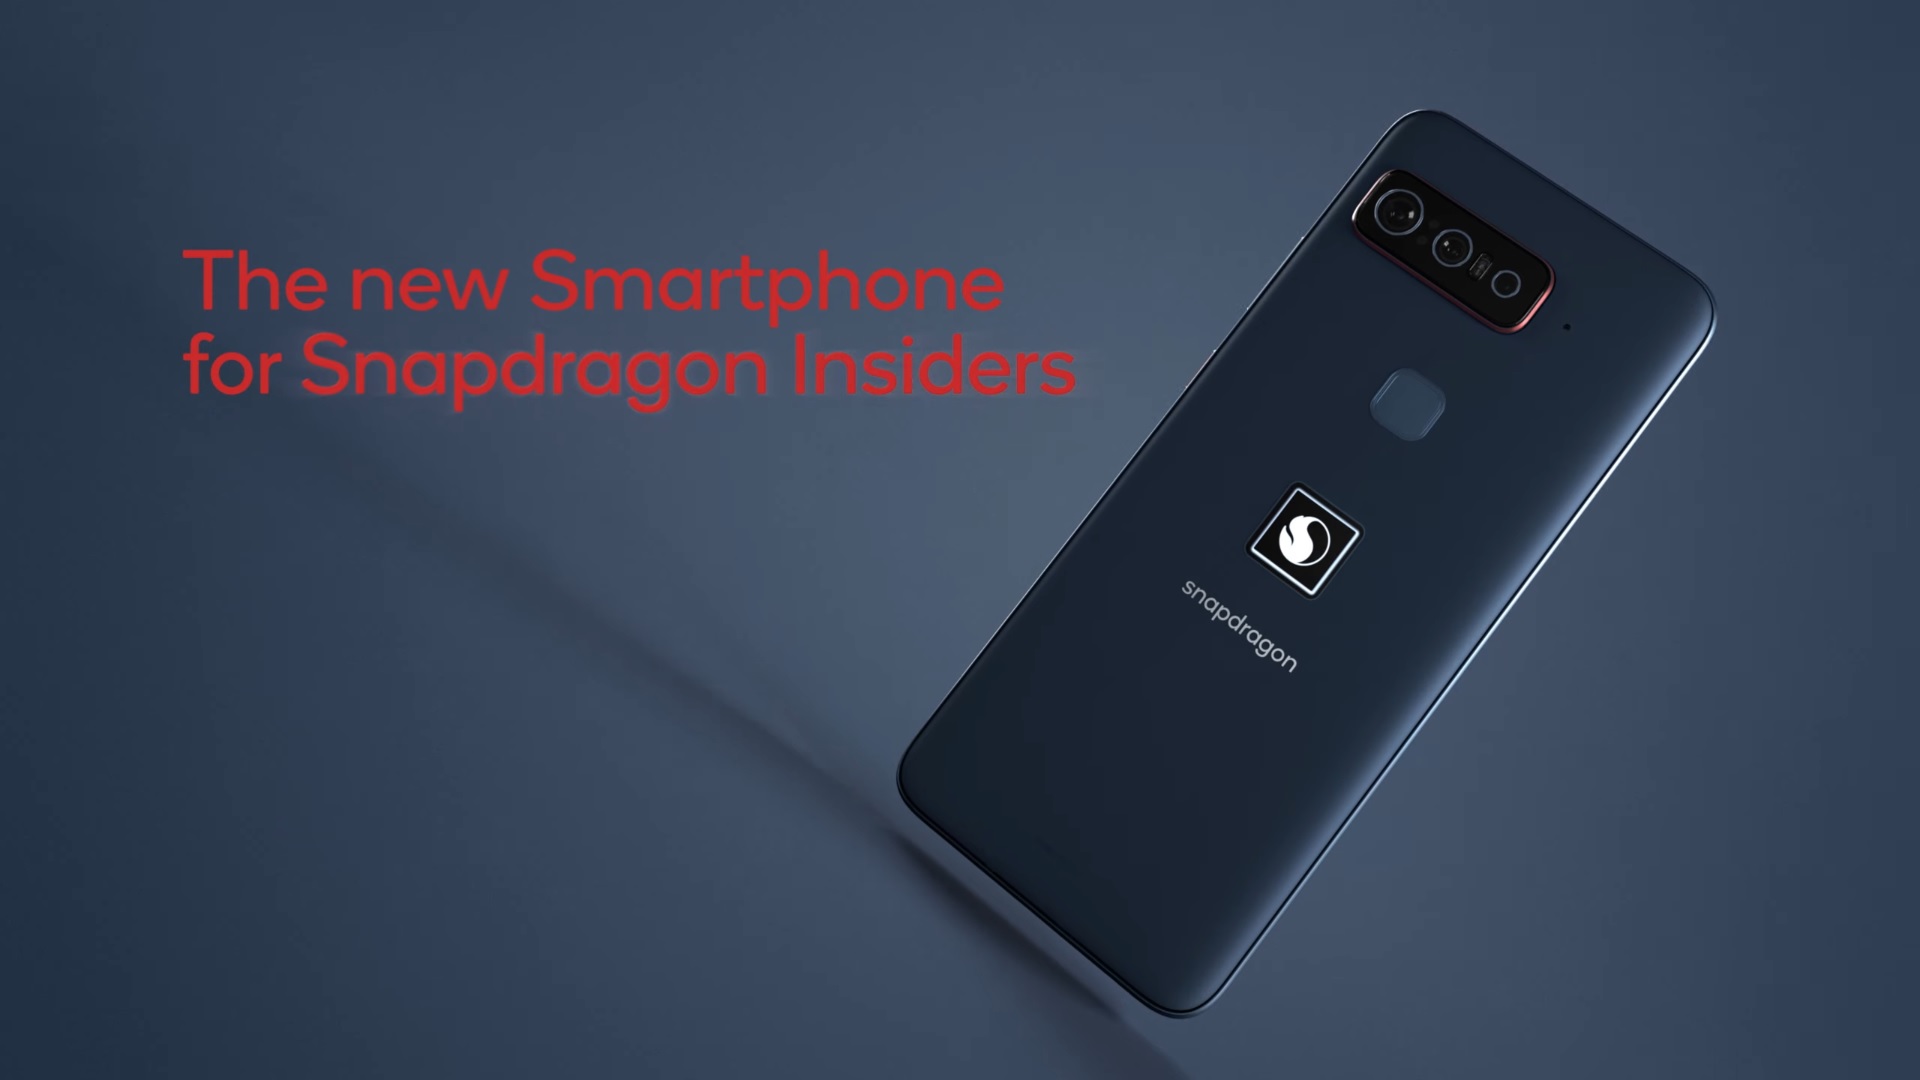 Snapdragon Phone With ASUS